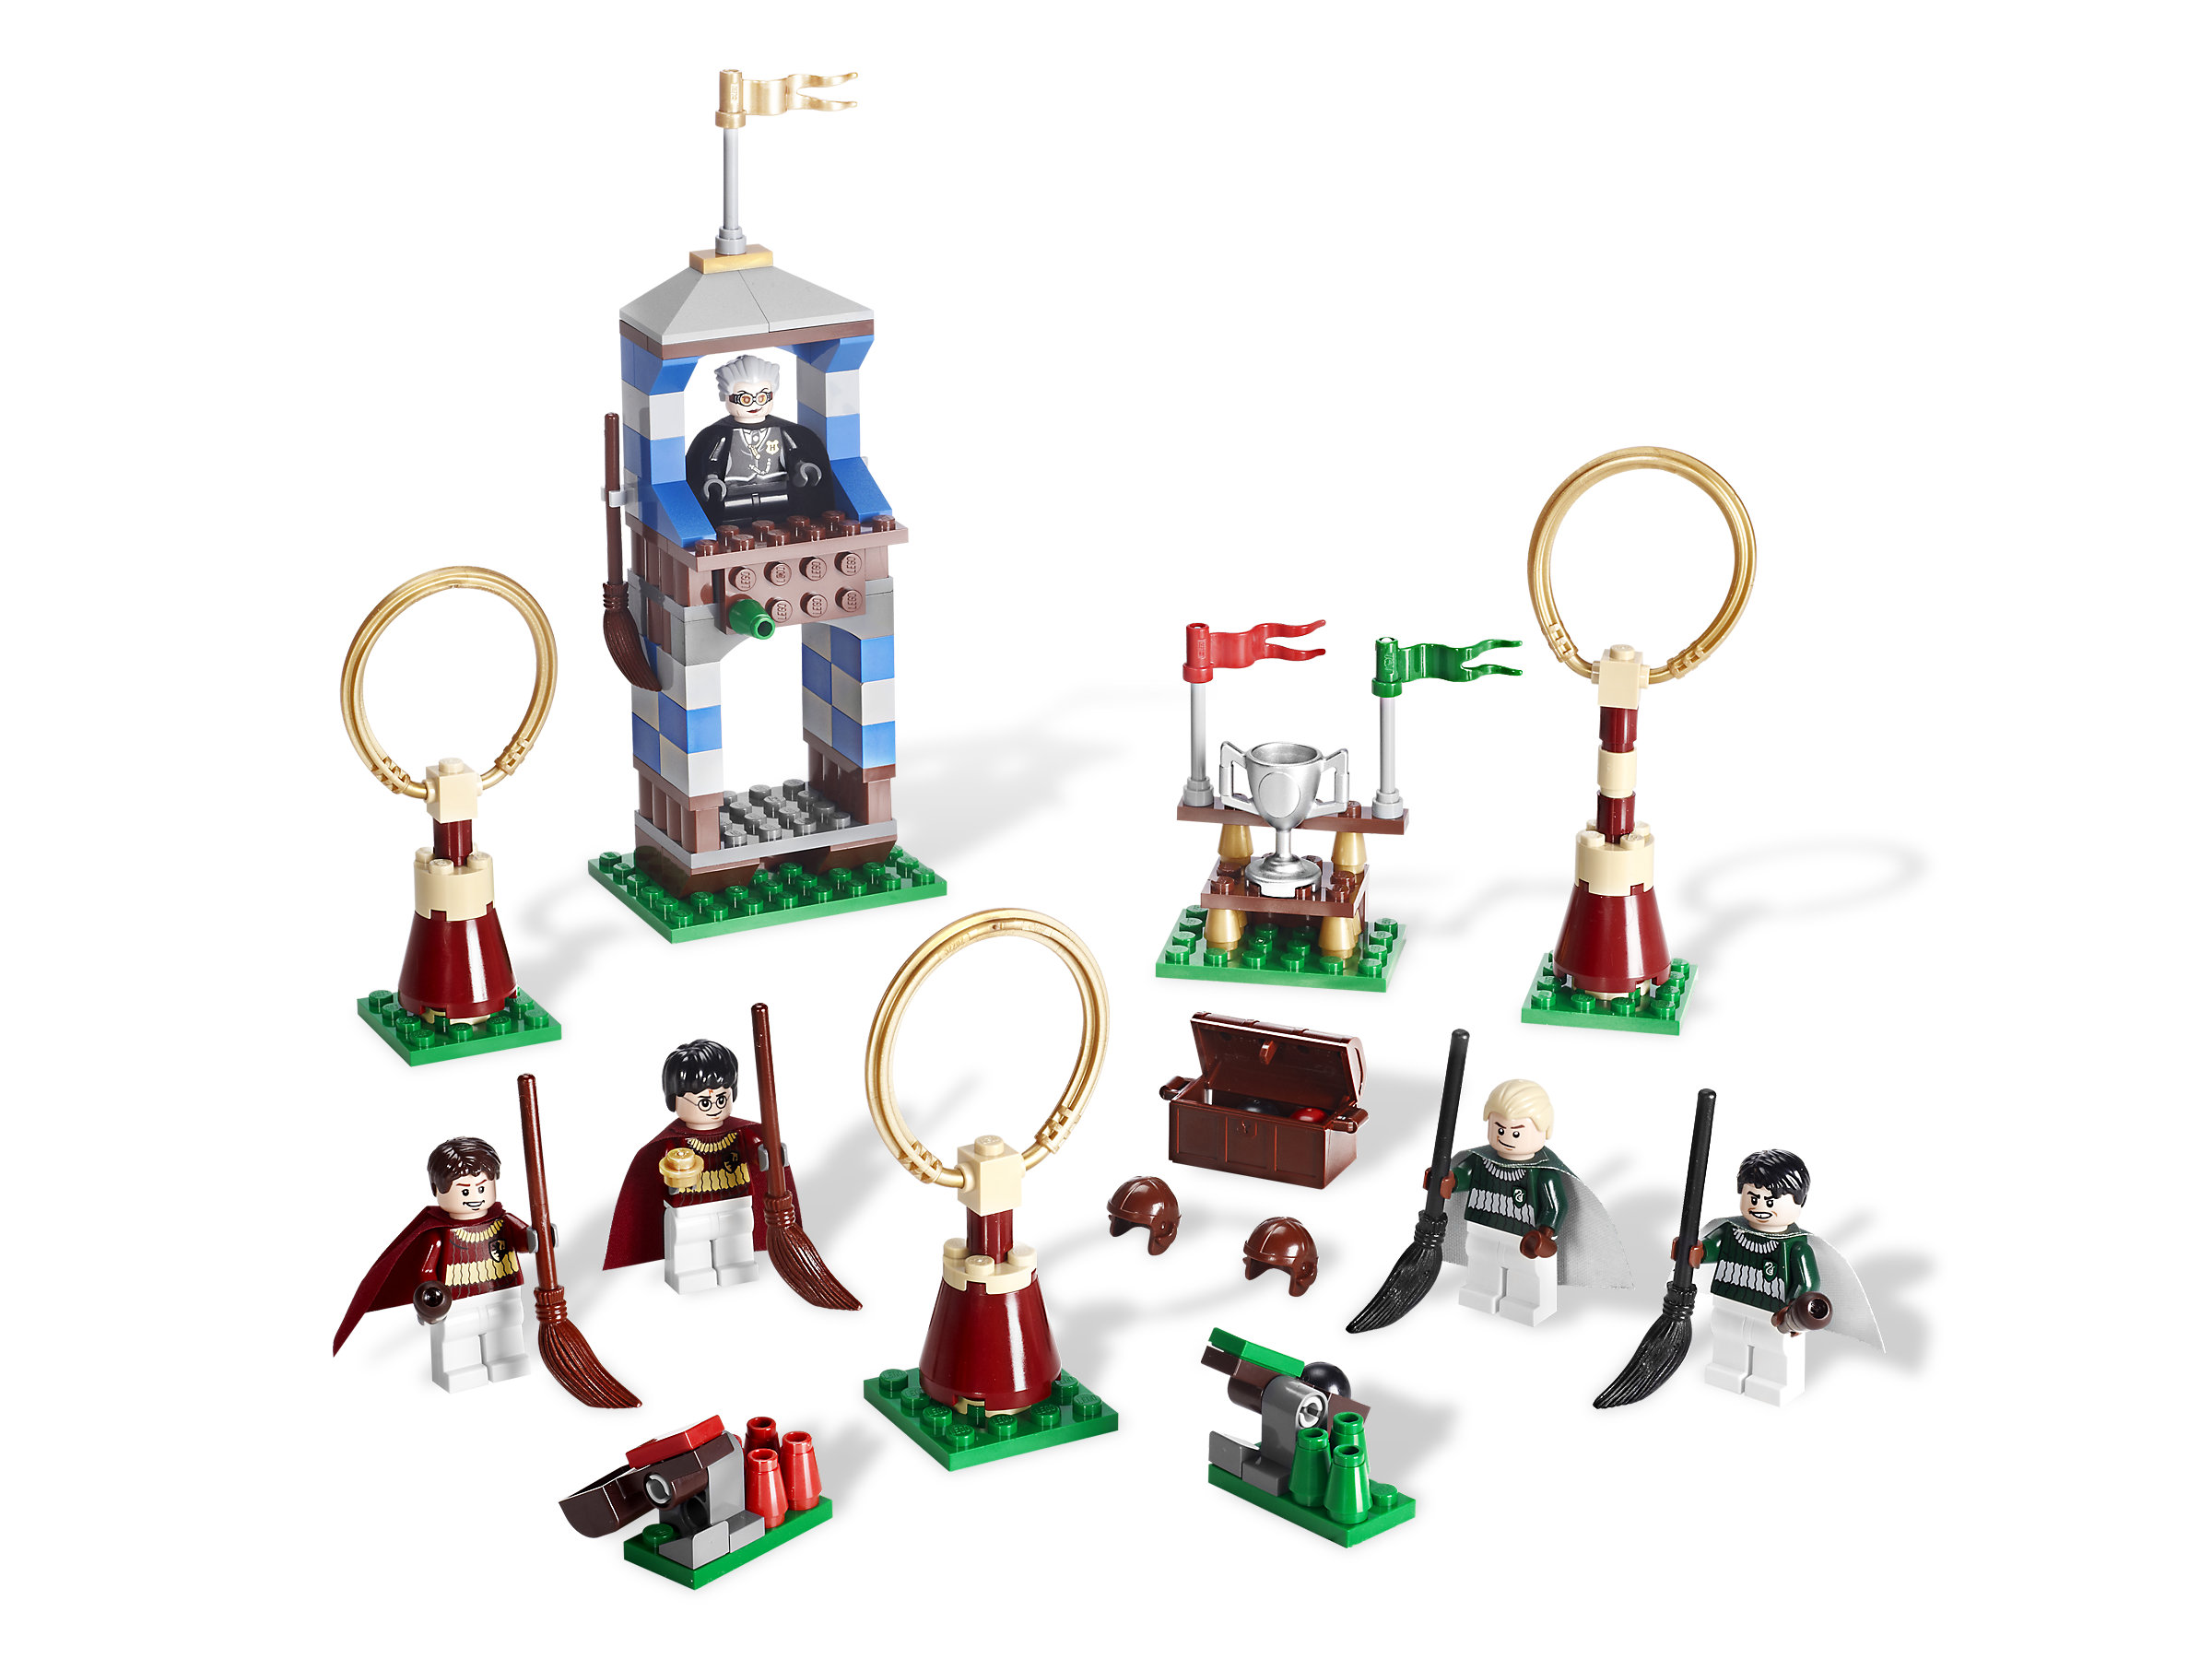 lego harry potter the quidditch stands